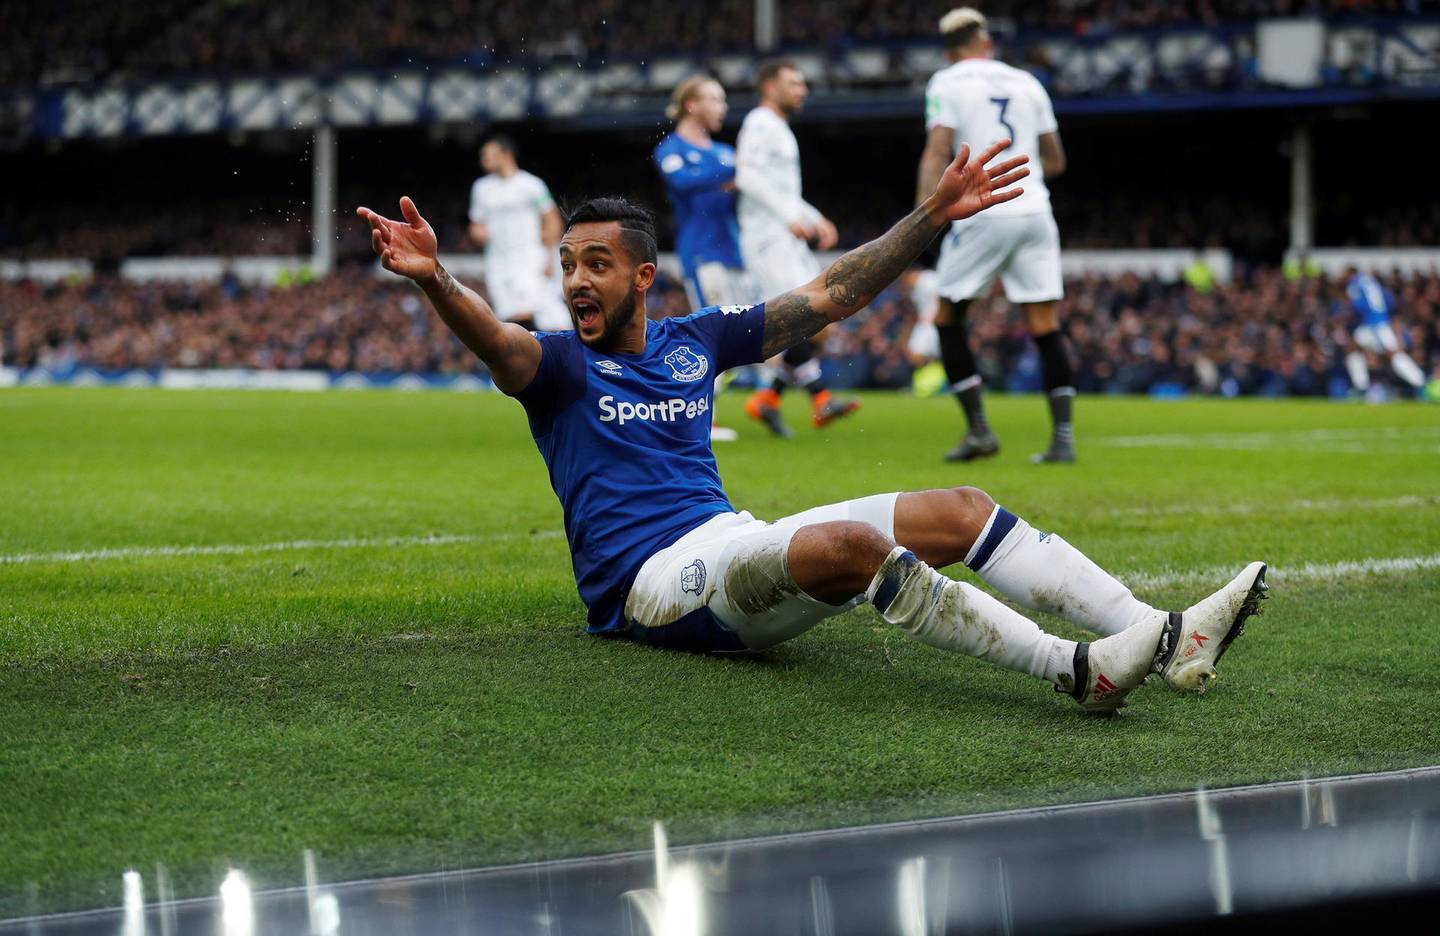 Soccer Football - Premier League - Everton vs Crystal Palace - Goodison Park, Liverpool, Britain - February 10, 2018   Everton's Theo Walcott reacts   Action Images via Reuters/Lee Smith    EDITORIAL USE ONLY. No use with unauthorized audio, video, data, fixture lists, club/league logos or "live" services. Online in-match use limited to 75 images, no video emulation. No use in betting, games or single club/league/player publications.  Please contact your account representative for further details.